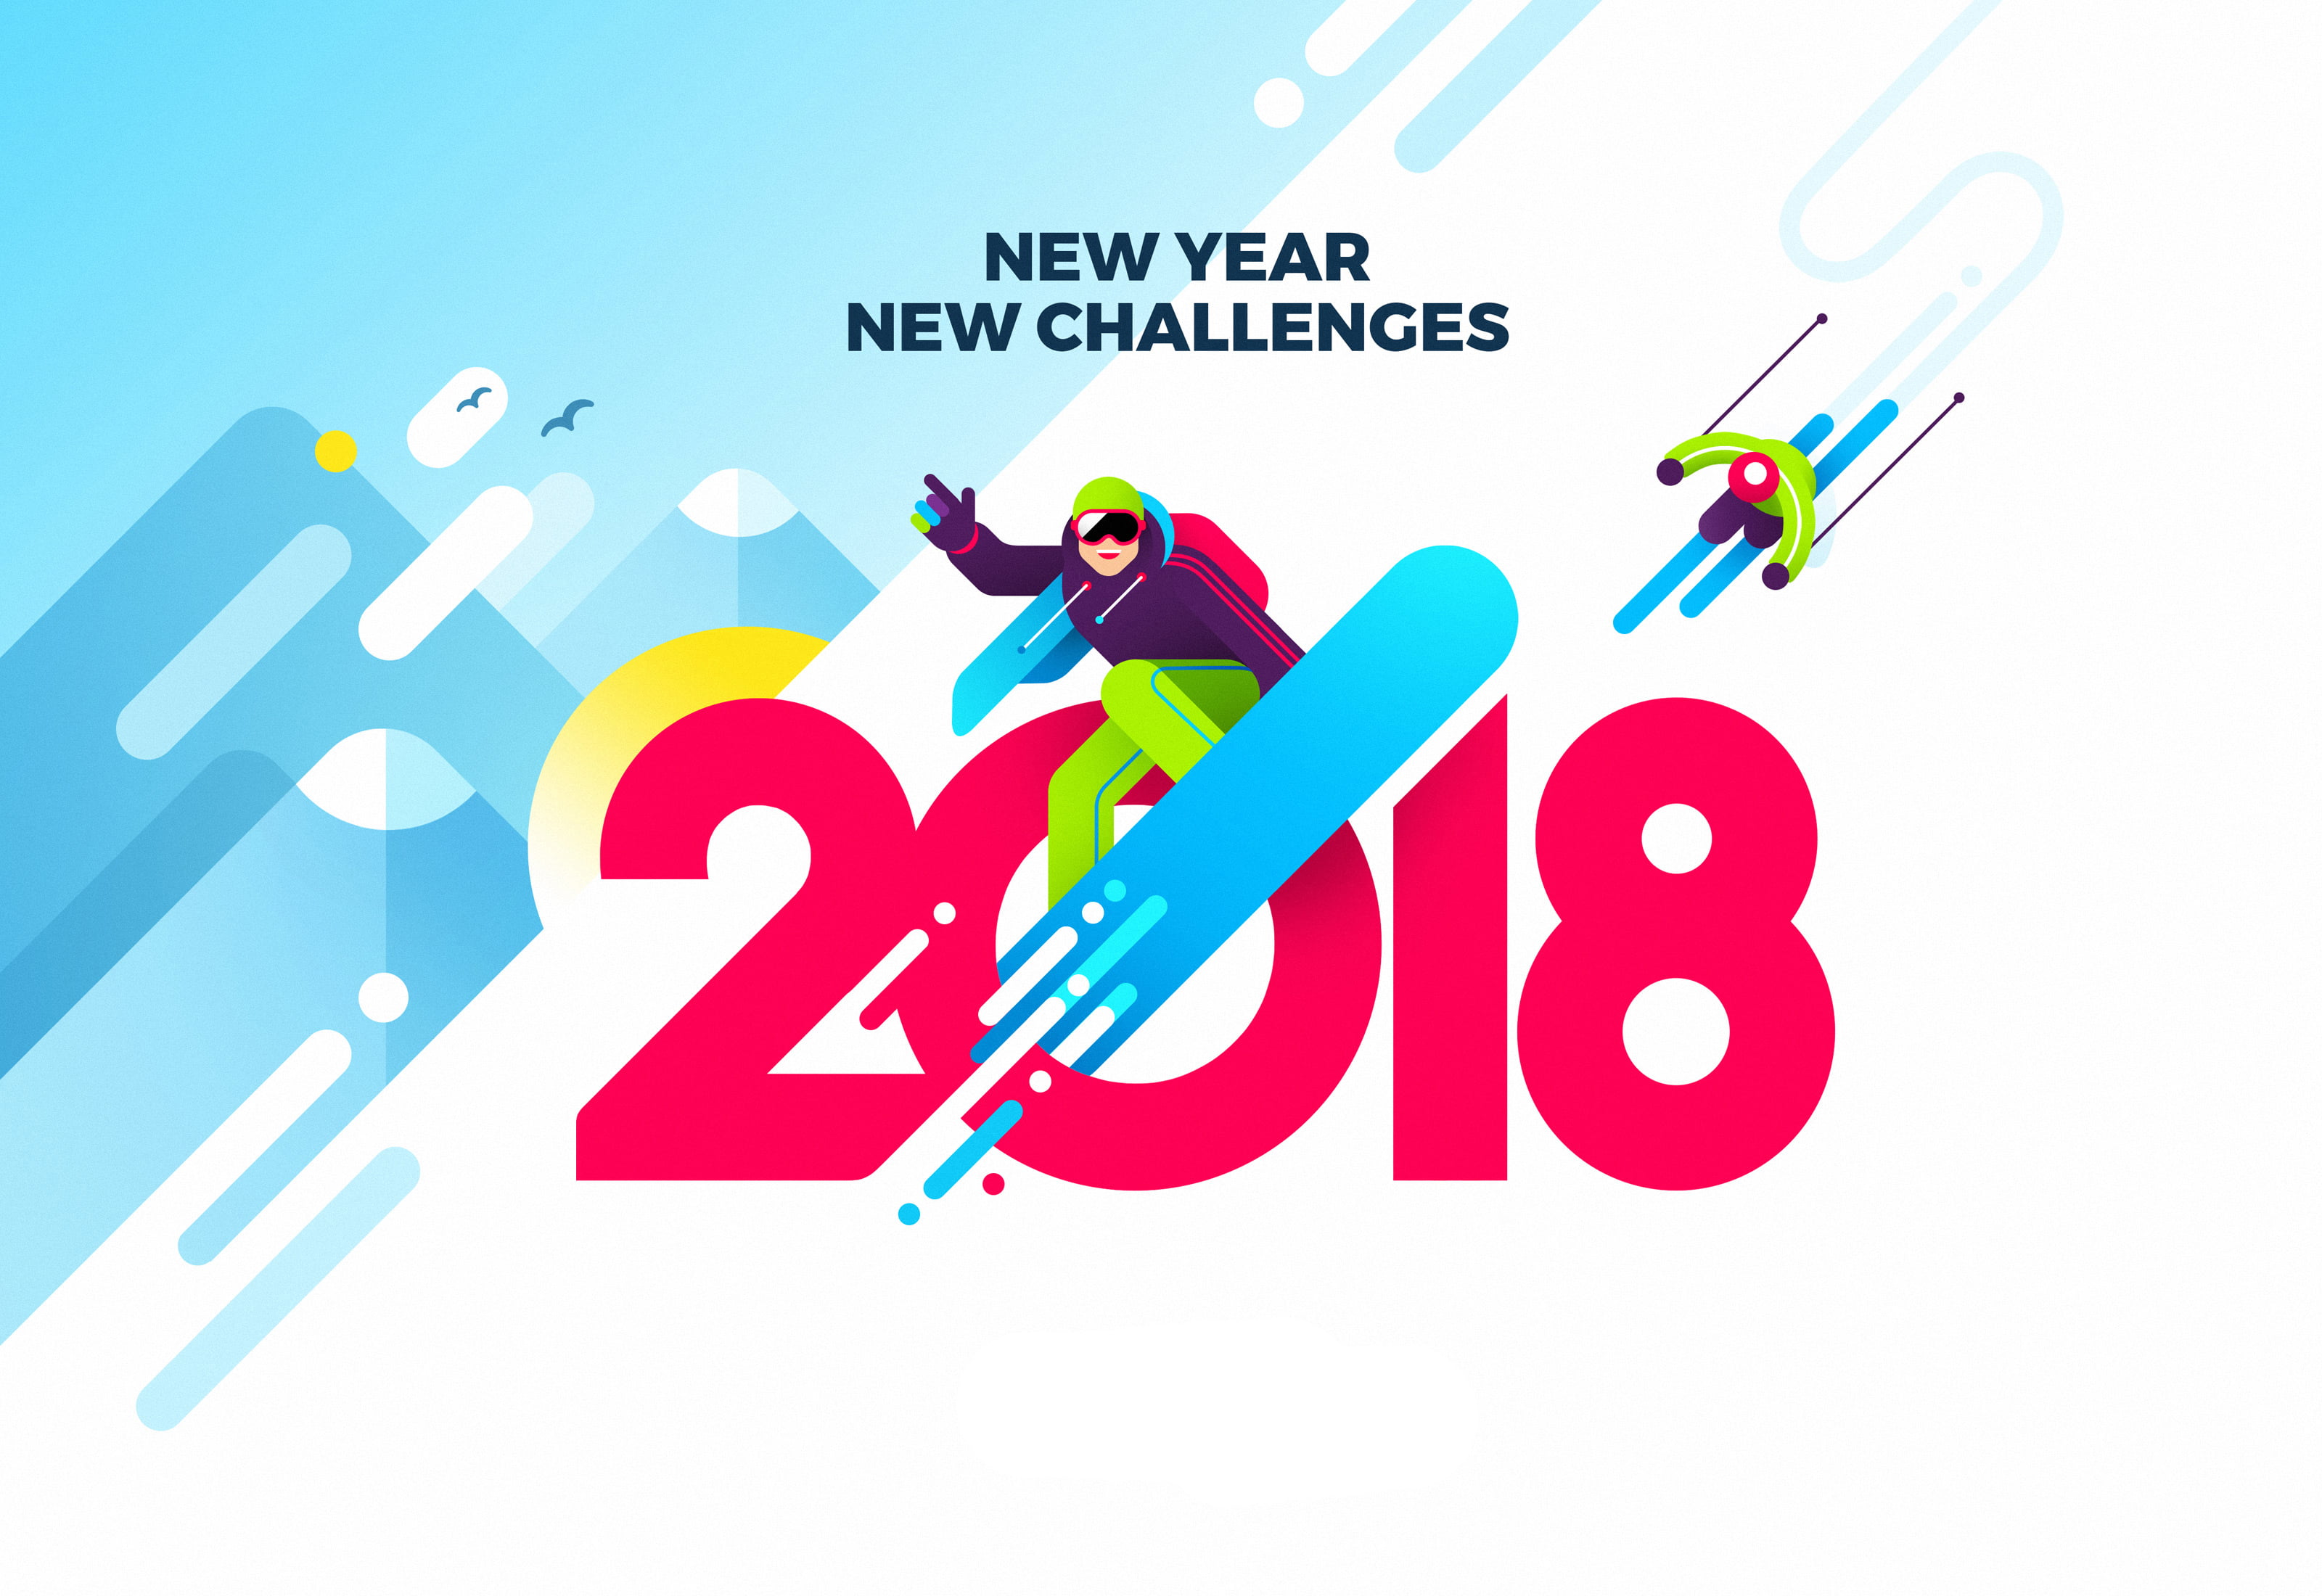 New Year New Challenges 2018